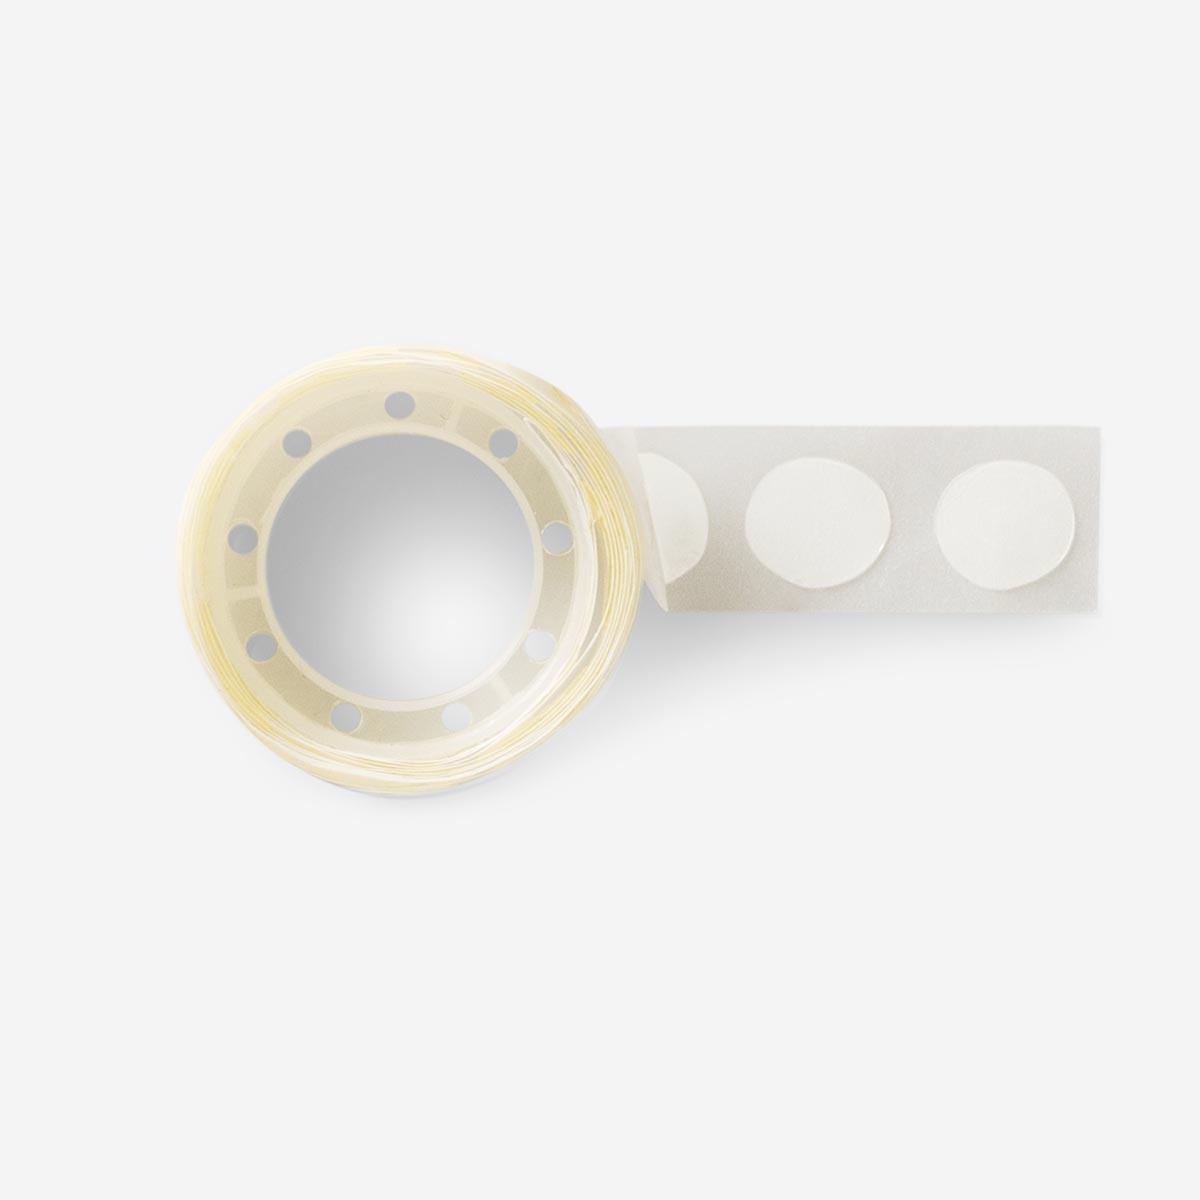 White double sided adhesive tape